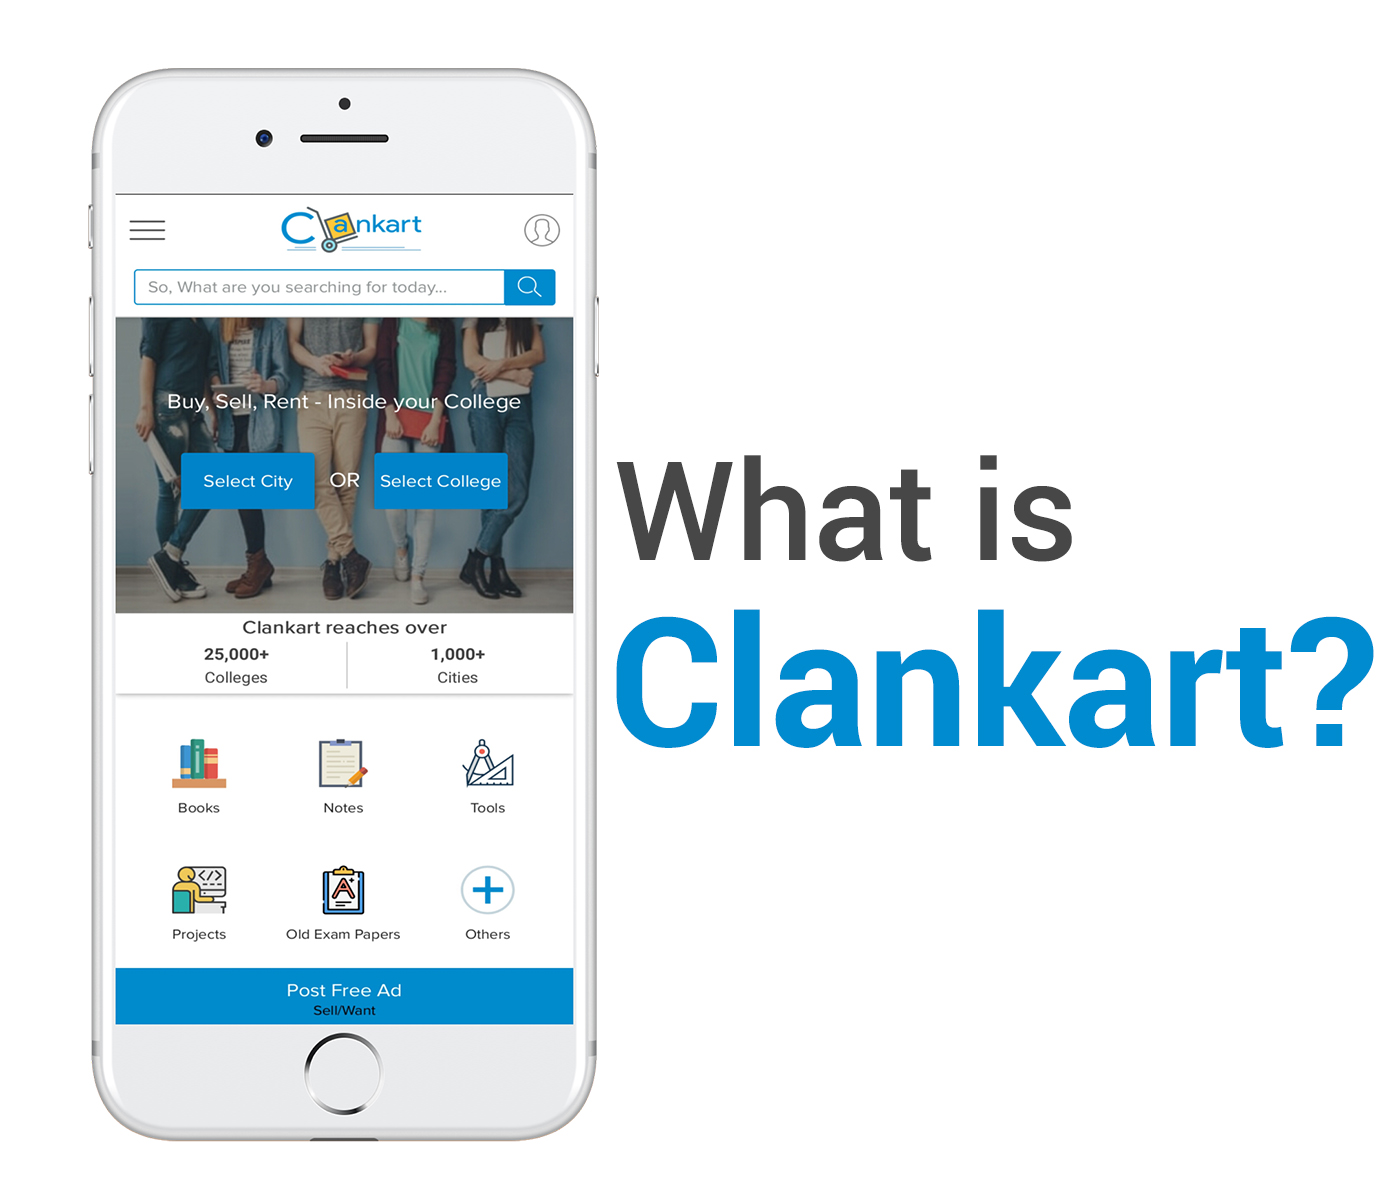 What is Clankart?